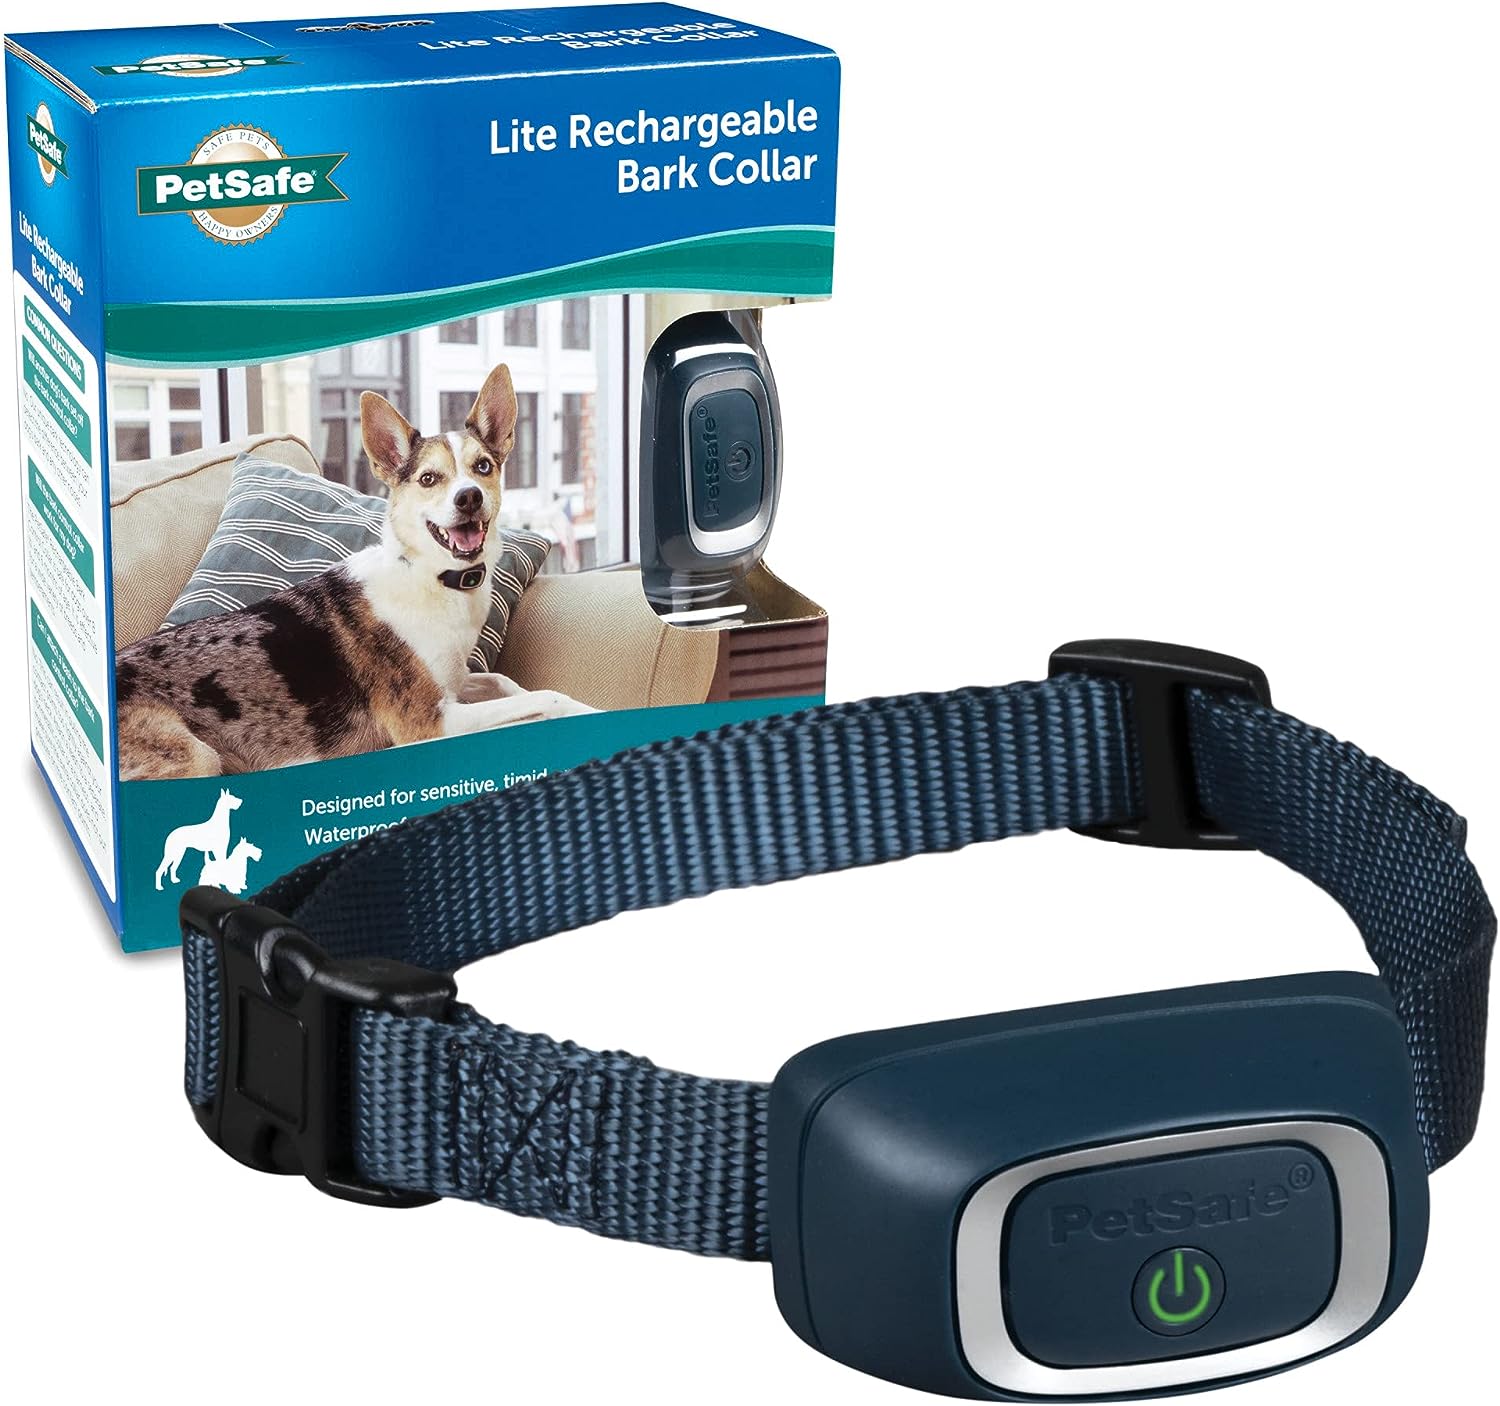 PetSafe Lite Rechargeable Bark Collar for Timid or Little Dogs over 8 lb., 15 Levels of Automatically Adjusting Light Static Correction - Rechargeable, Waterproof - Reduces Barking and Whining